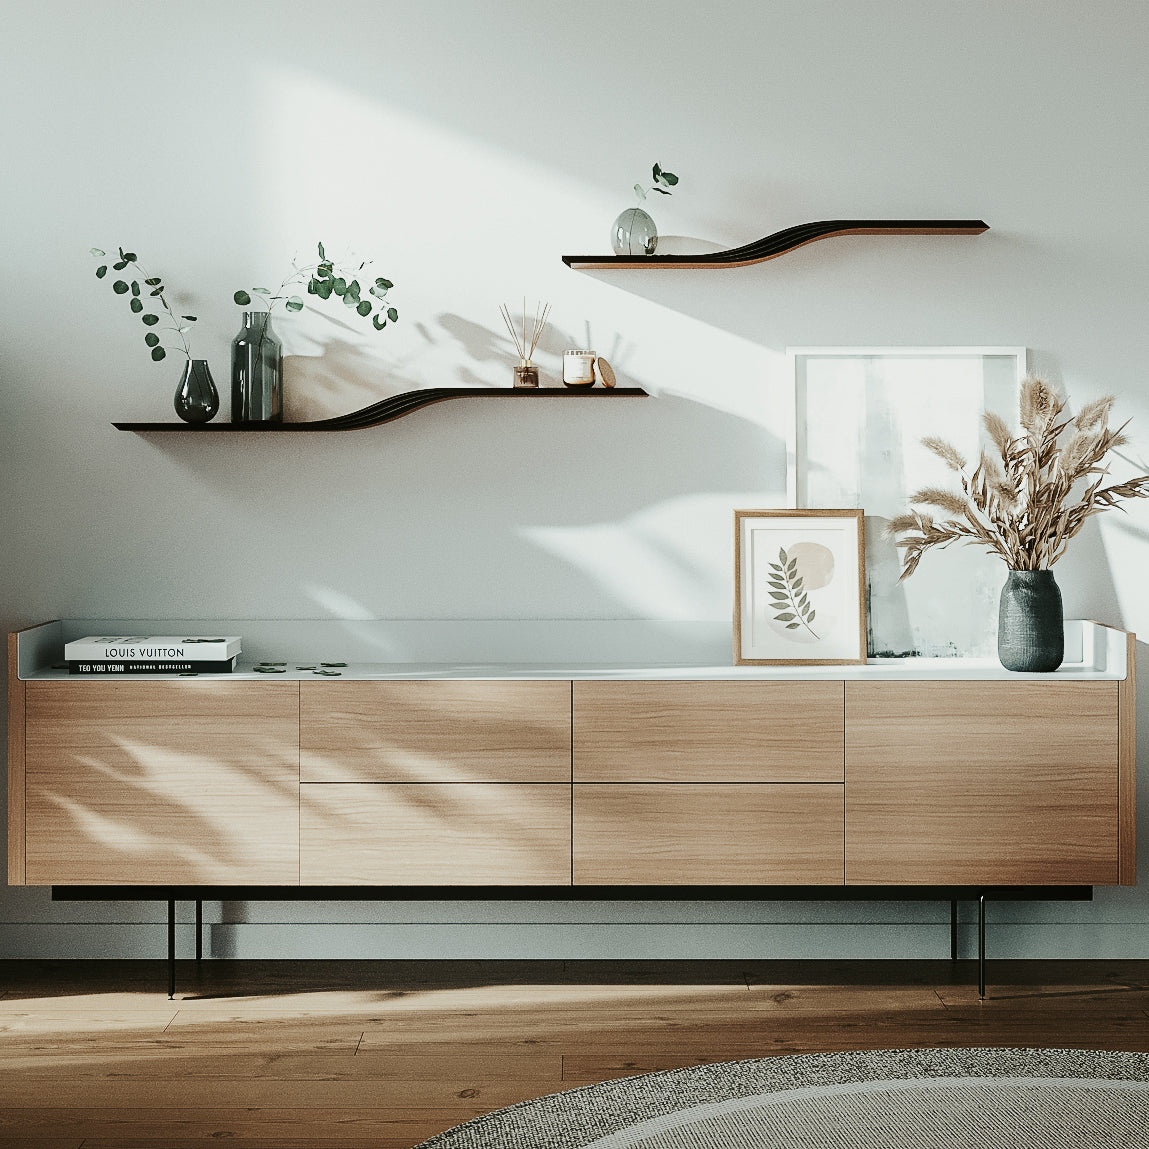 wooden sofa arms, floating wall shelves, and unique wall art designed to enhance the aesthetics and functionality of living spaces with a blend of wood and metal materials.